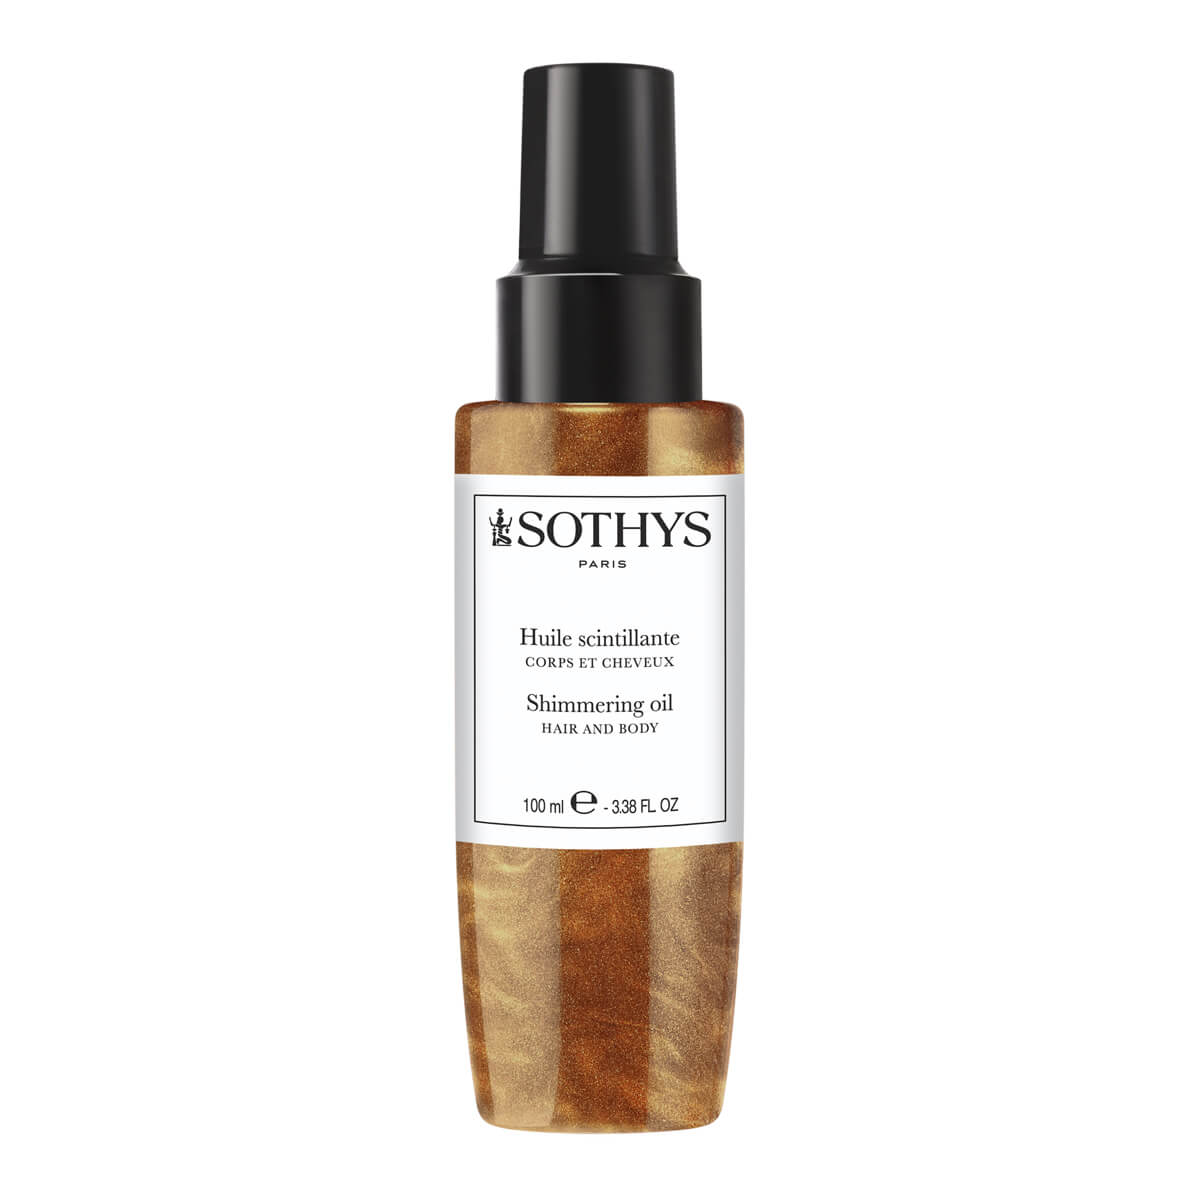 Sothys Shimmering oil Hair and Body